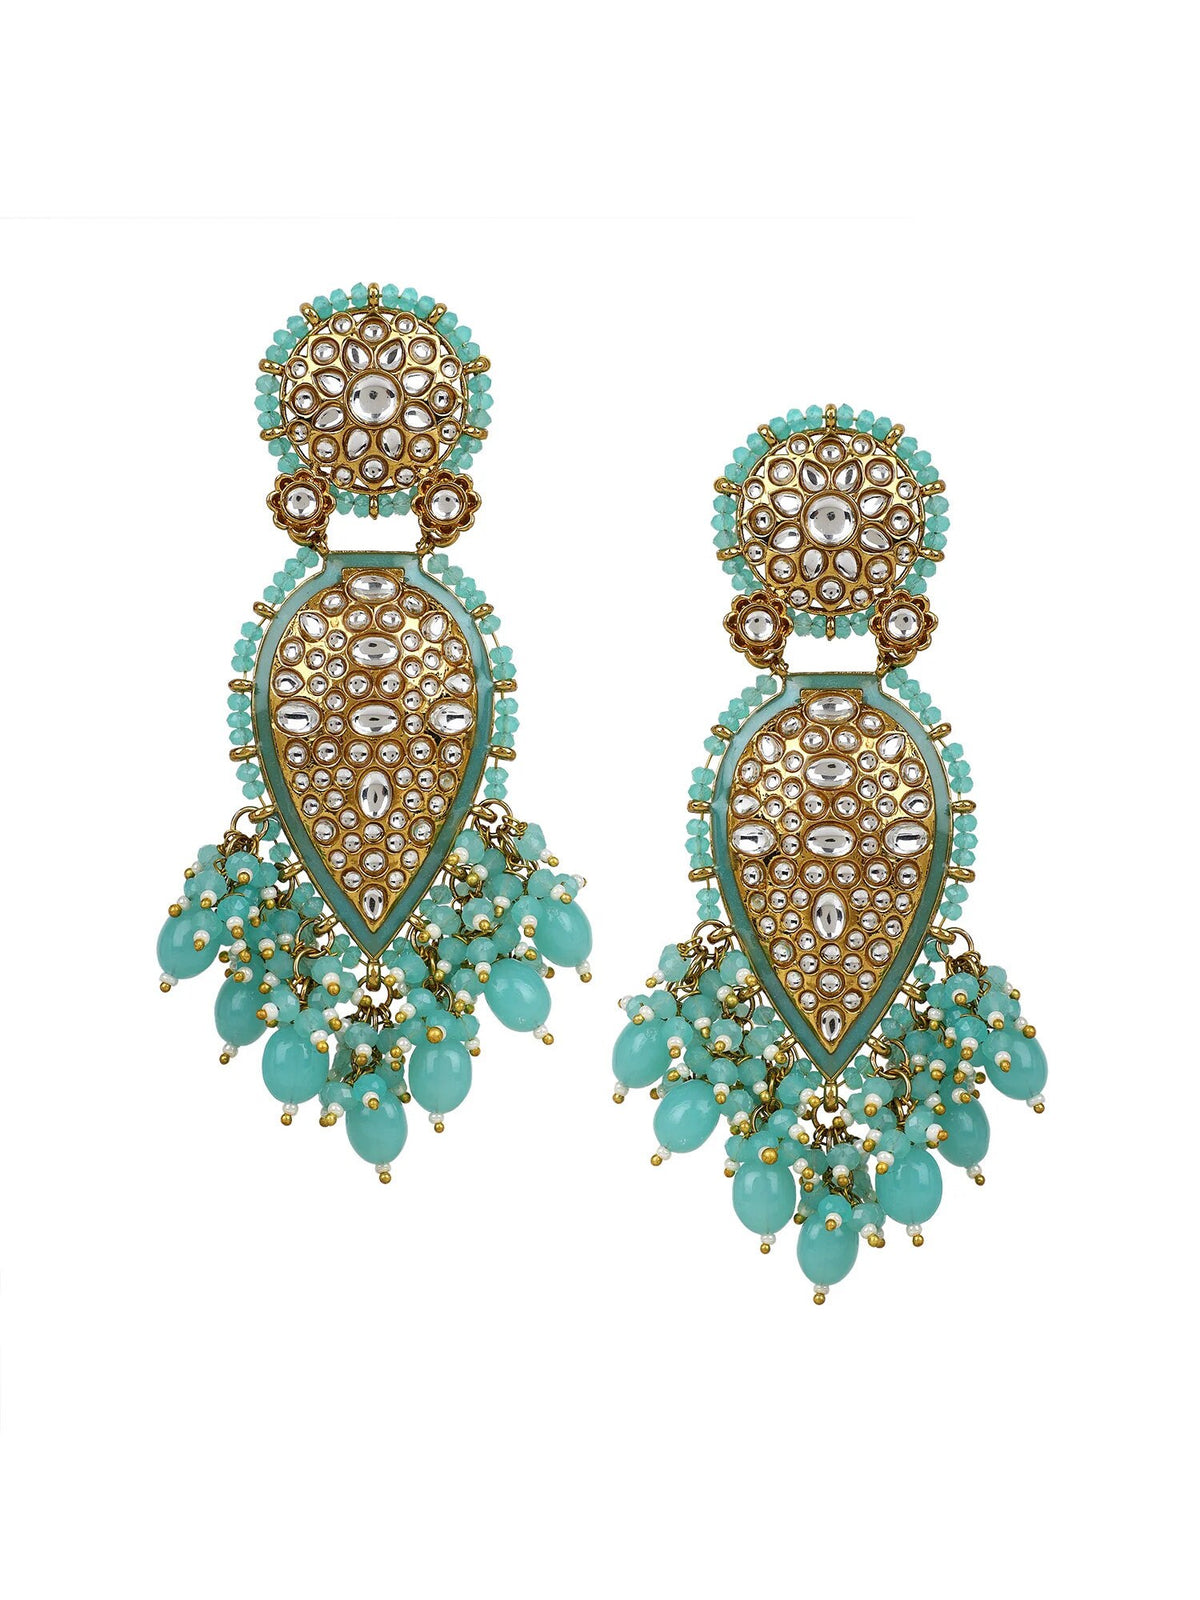 Jhumka earrings pearl kundan, Indian Earrings Gold Plated Traditional Indian Jewelry | Bollywood Jewelry | Gifts for Her